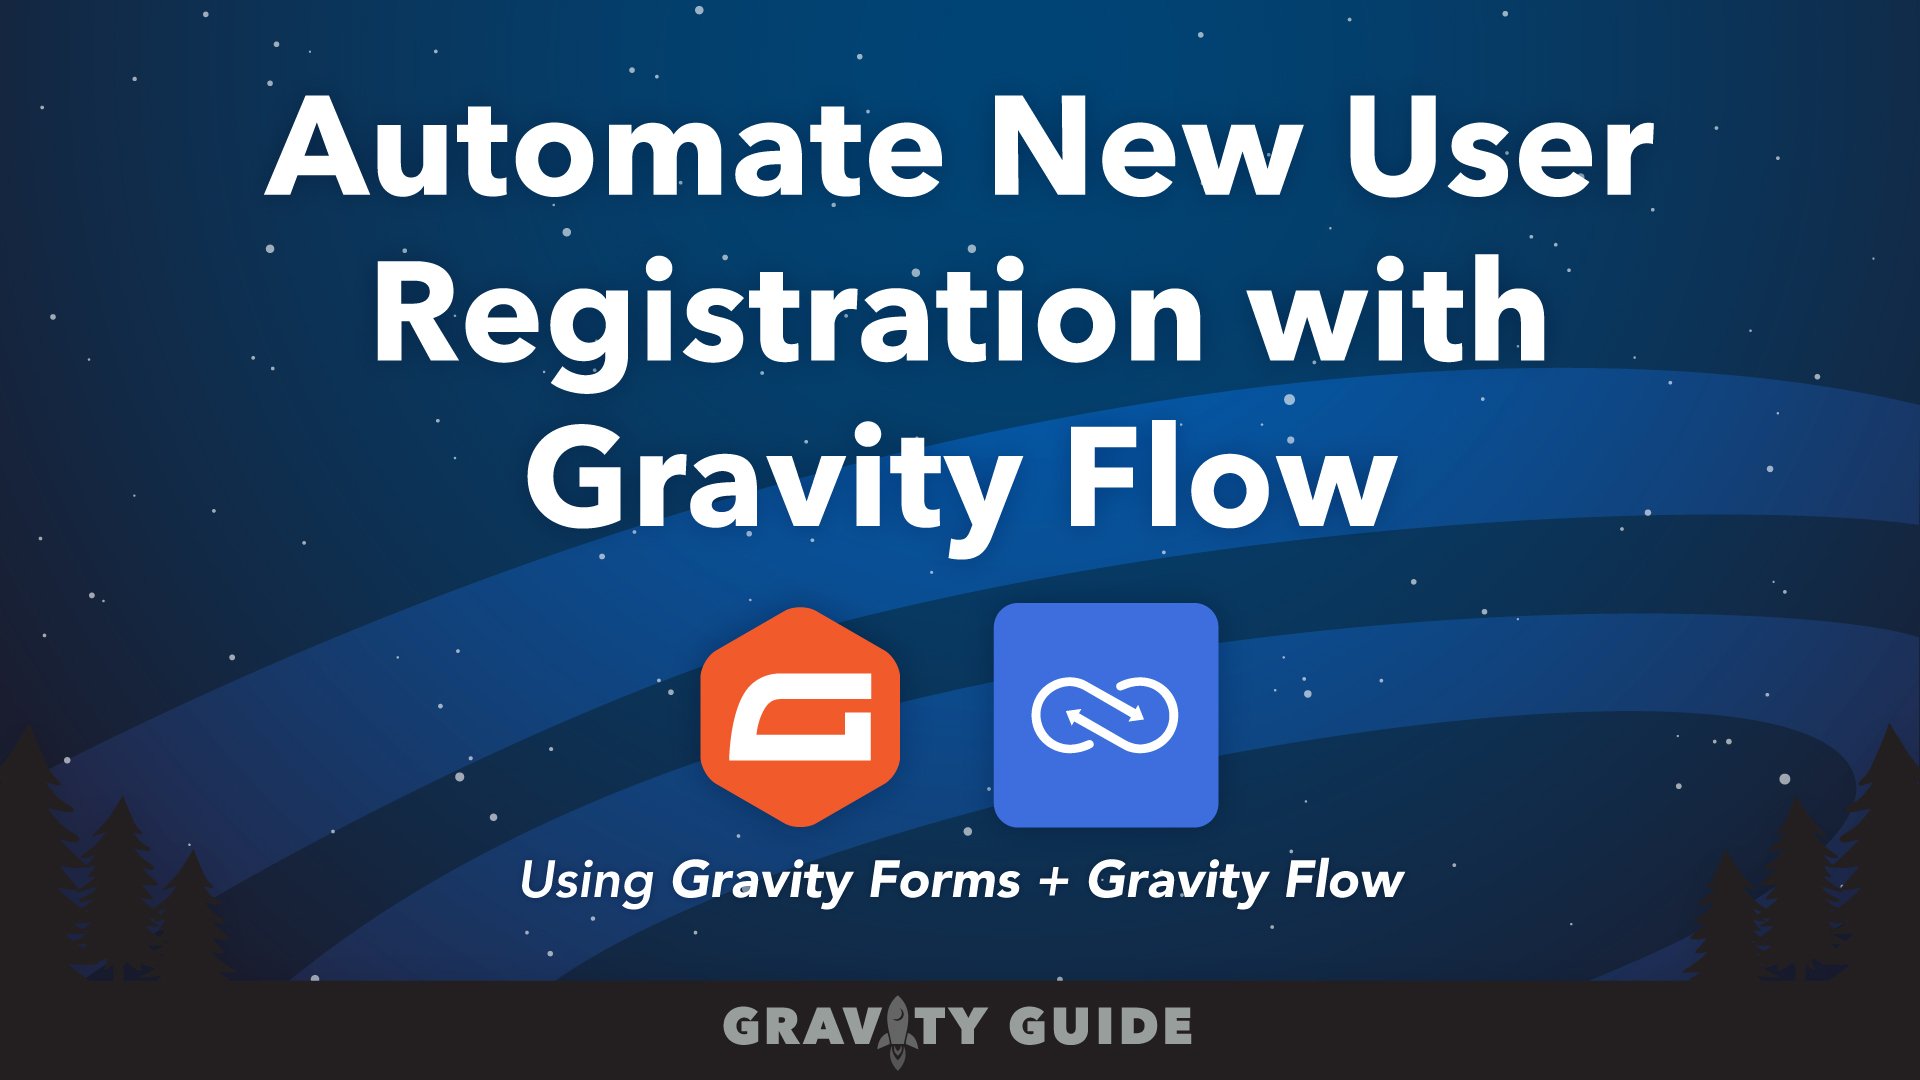 Automate New User Registration with Gravity Flow